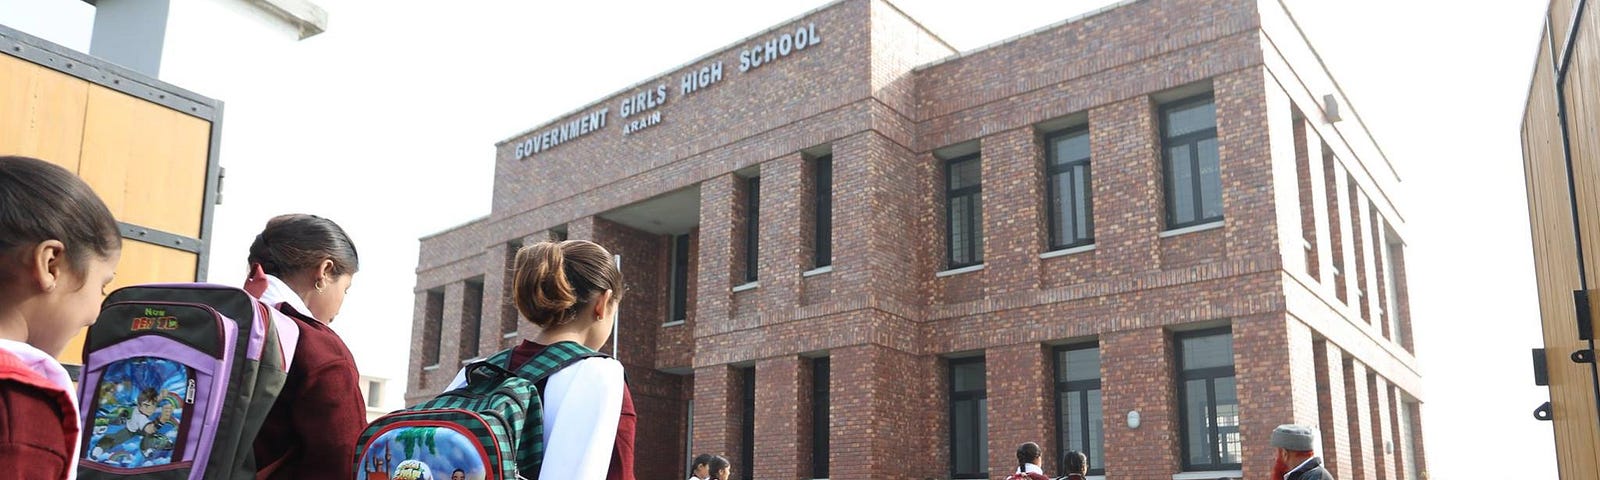 Schoolgirls with backpacks walk towards a newly constructed, two-story brick school. A school official sits outside the school at a desk.